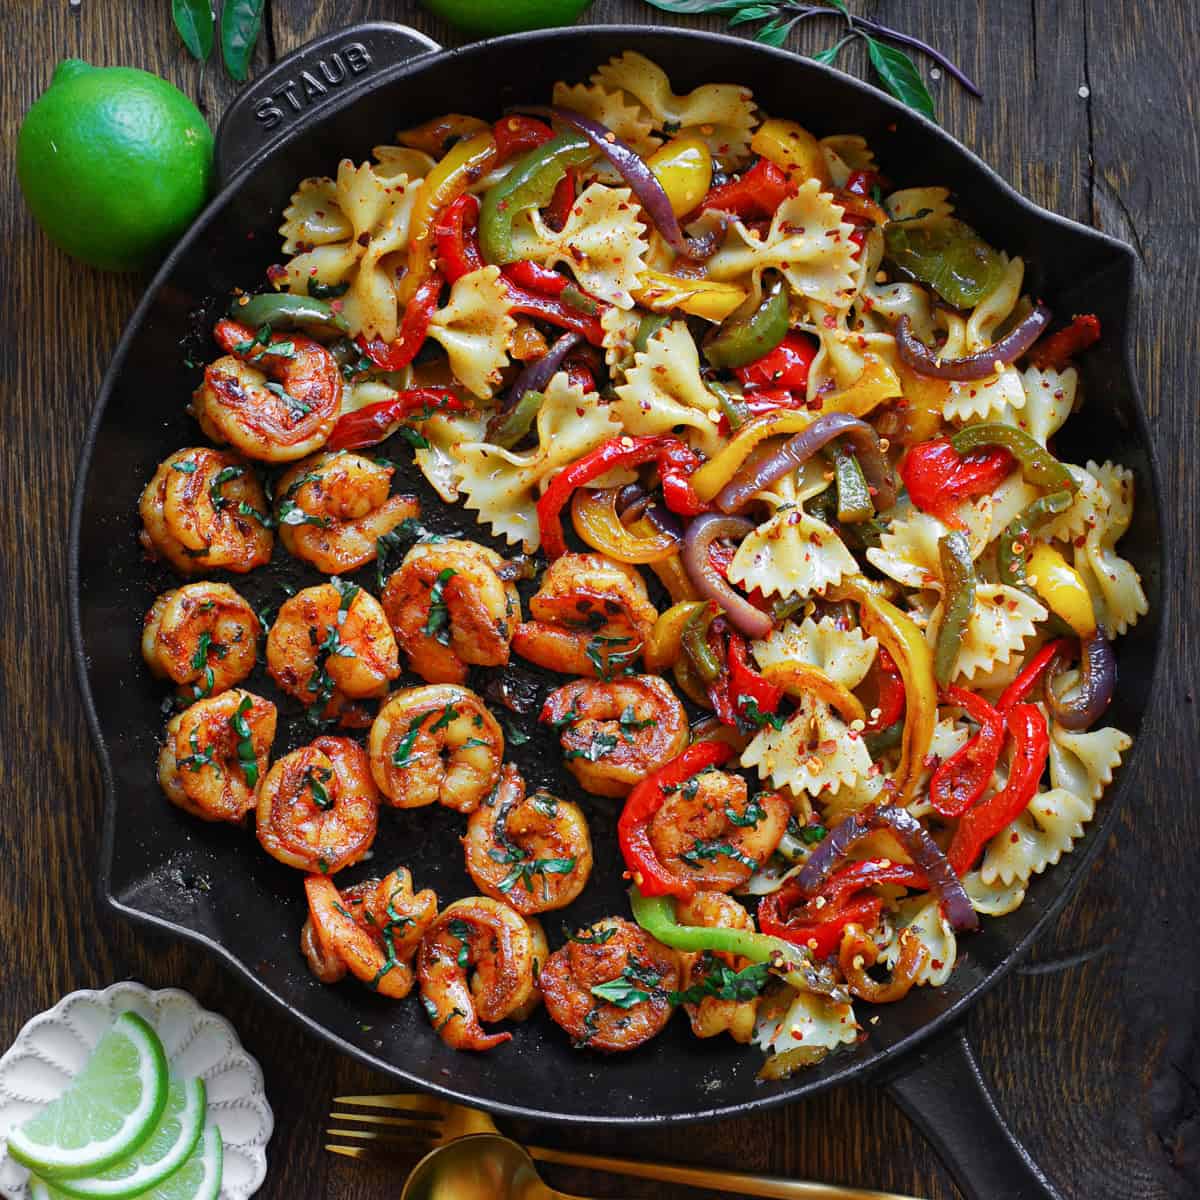 Shrimp Pasta with Bell Peppers (fajita-style)